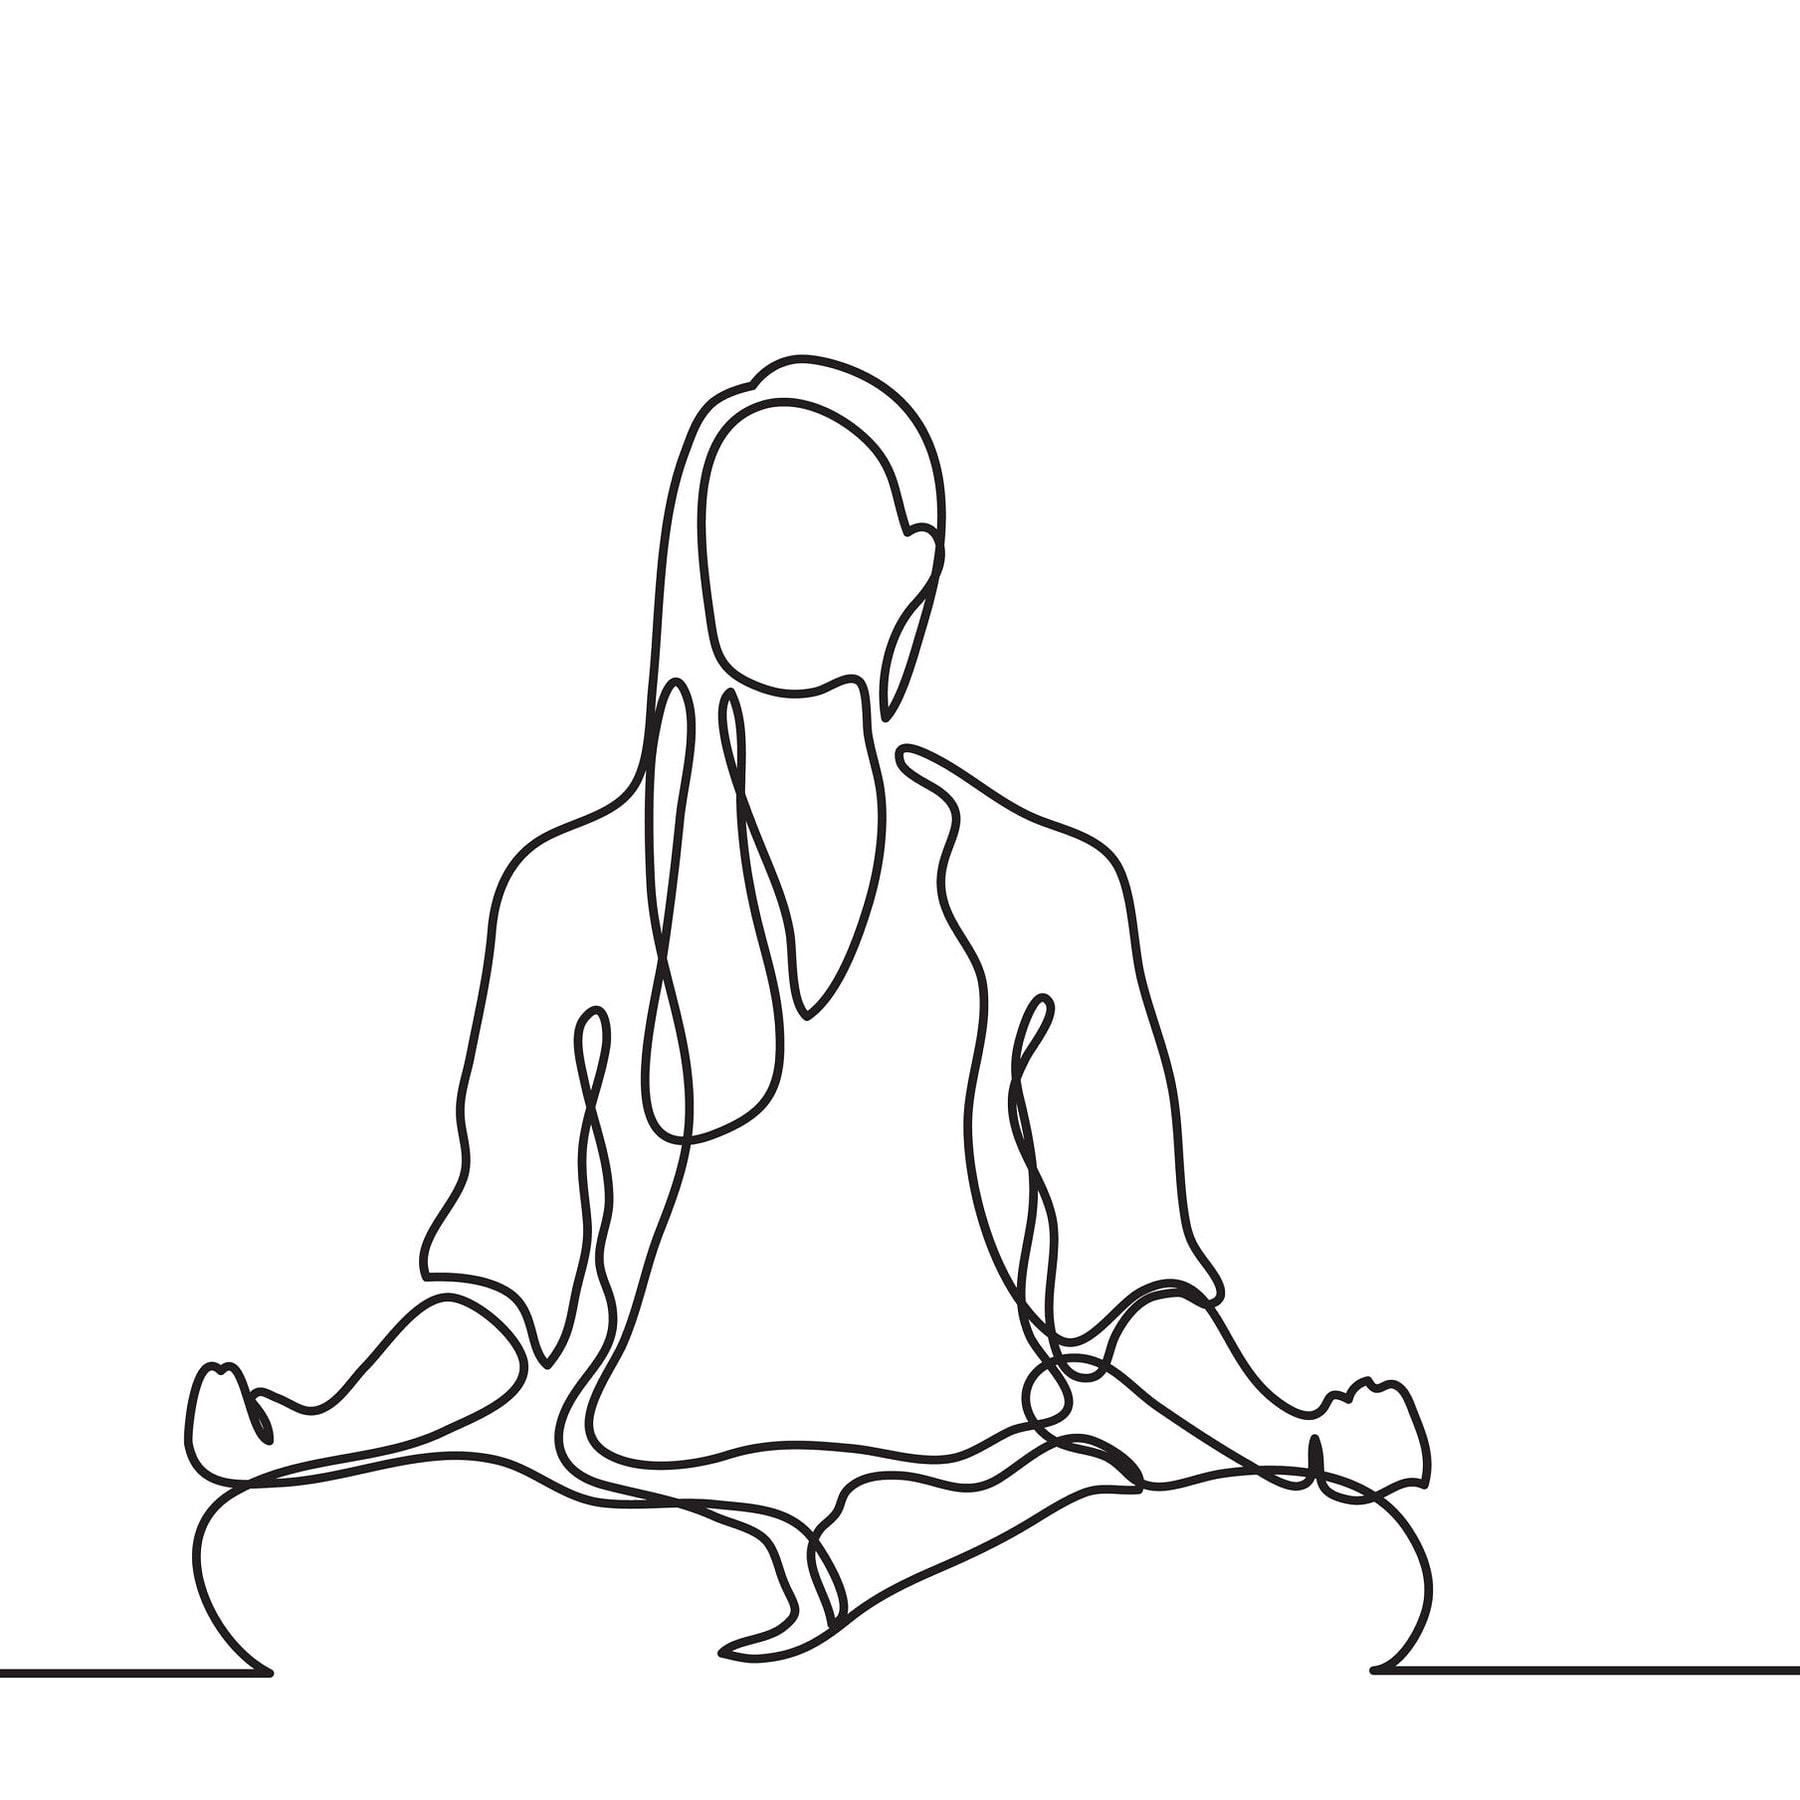 What Is Meditation? - Thought for Today